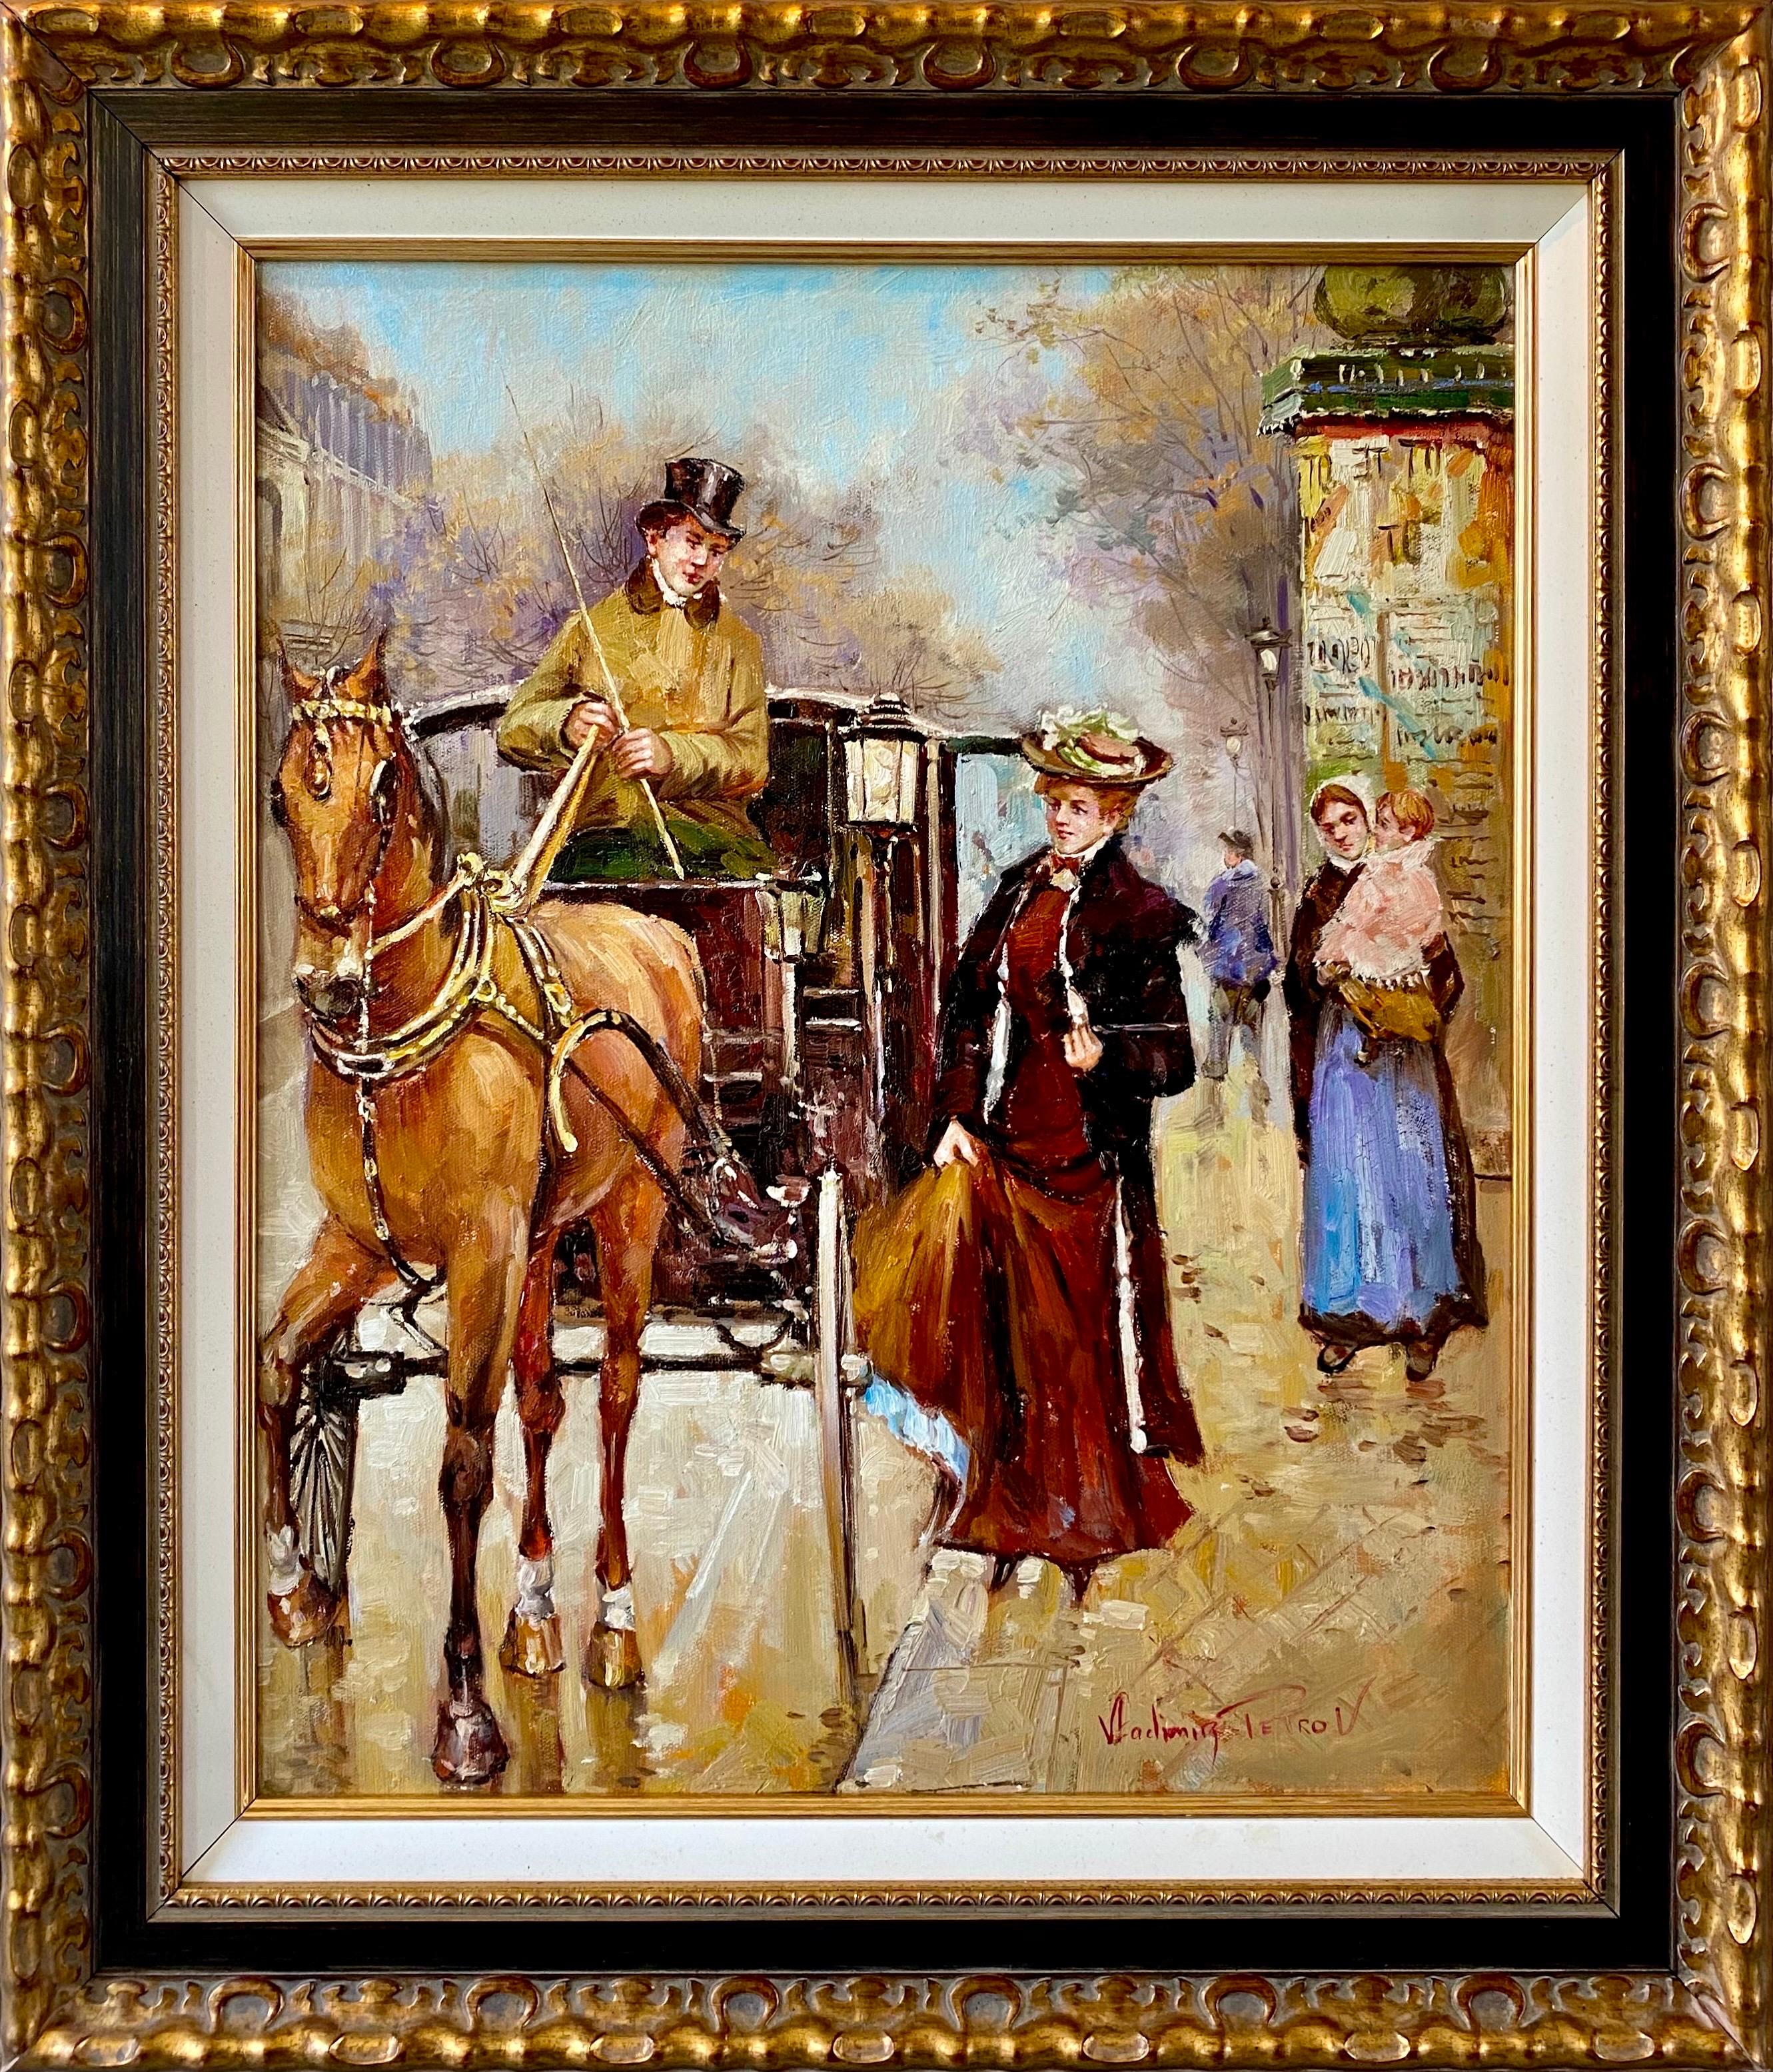 Vladimir Petrov Figurative Painting - 19th century style French impressionist - Horse carriage ride Paris 